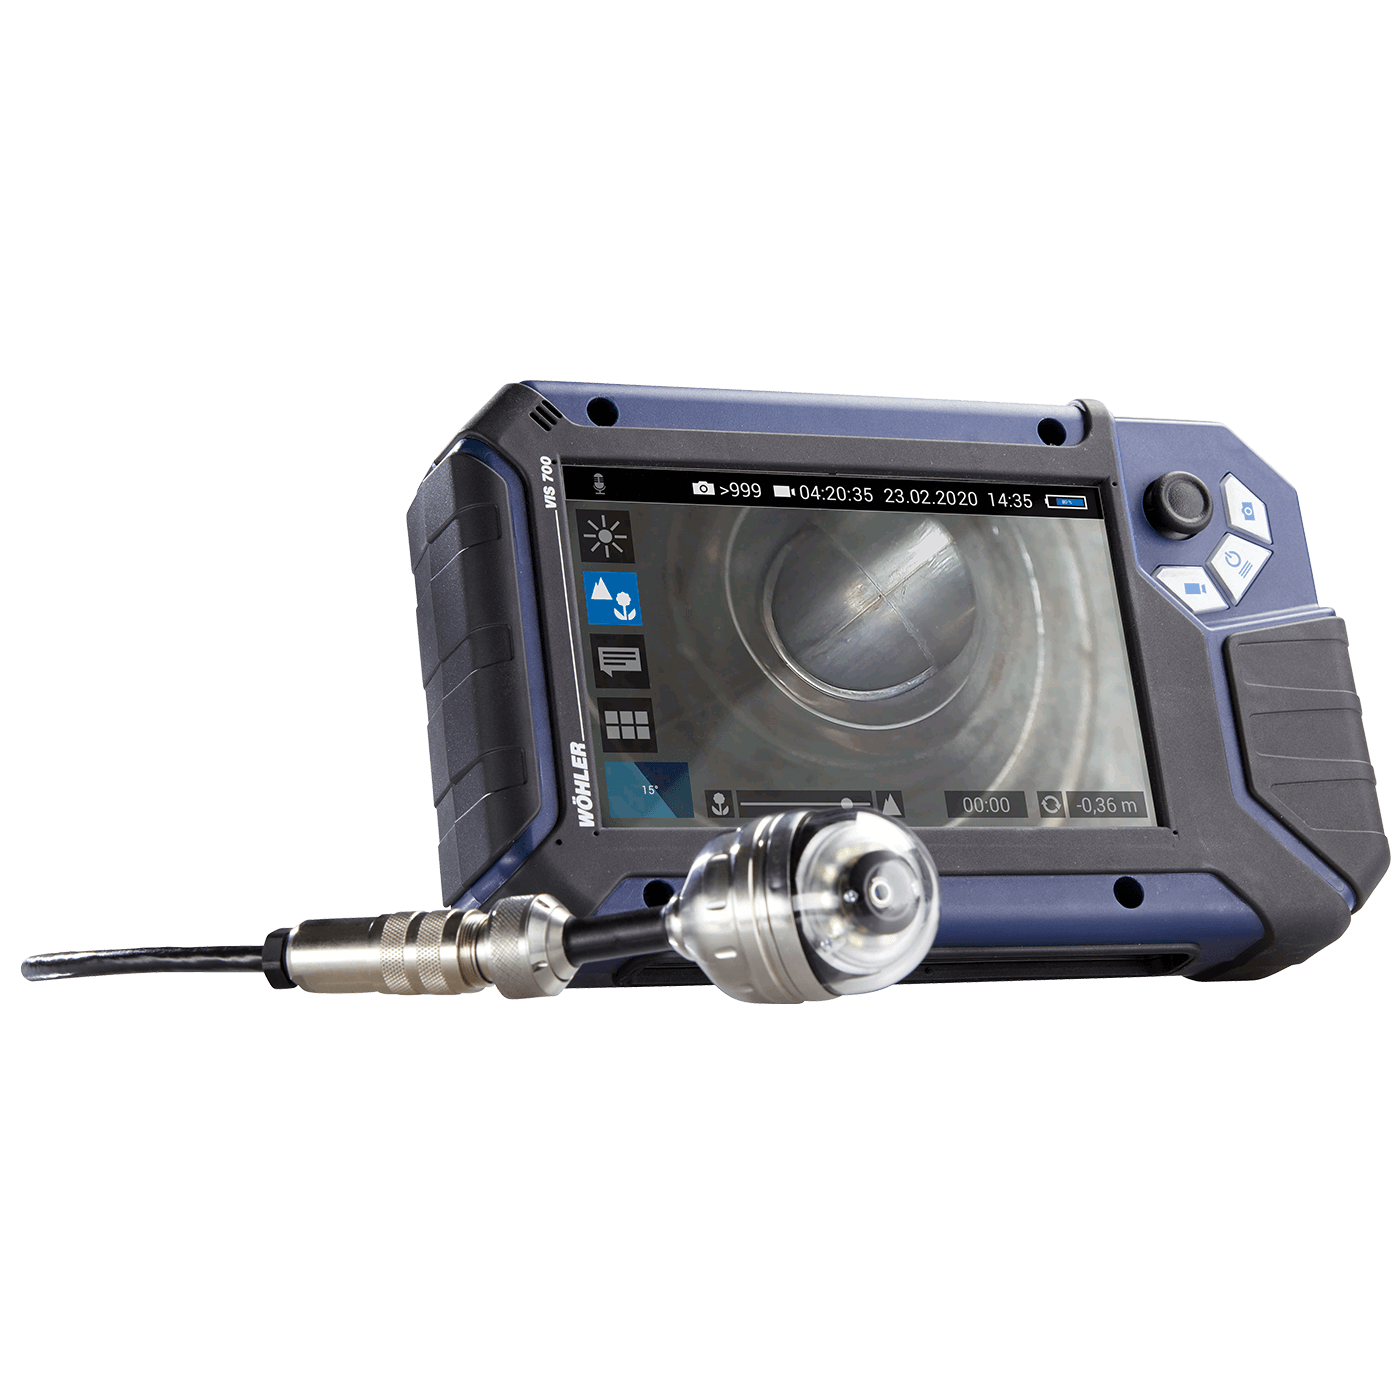 Wohler VIS 700 Pipe and drain Inspection Camera 